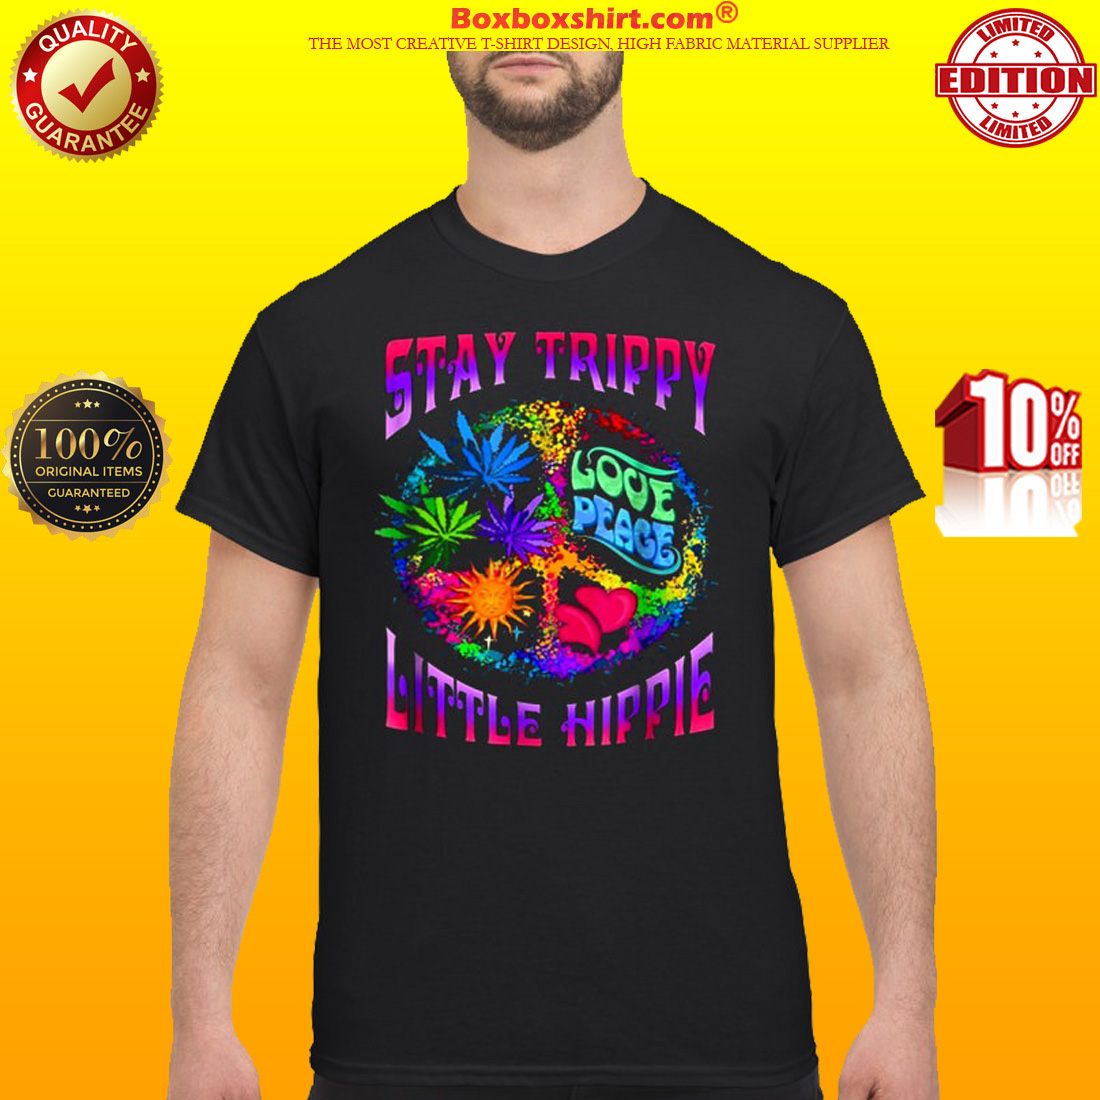 Stay trippy little hippie classic shirt